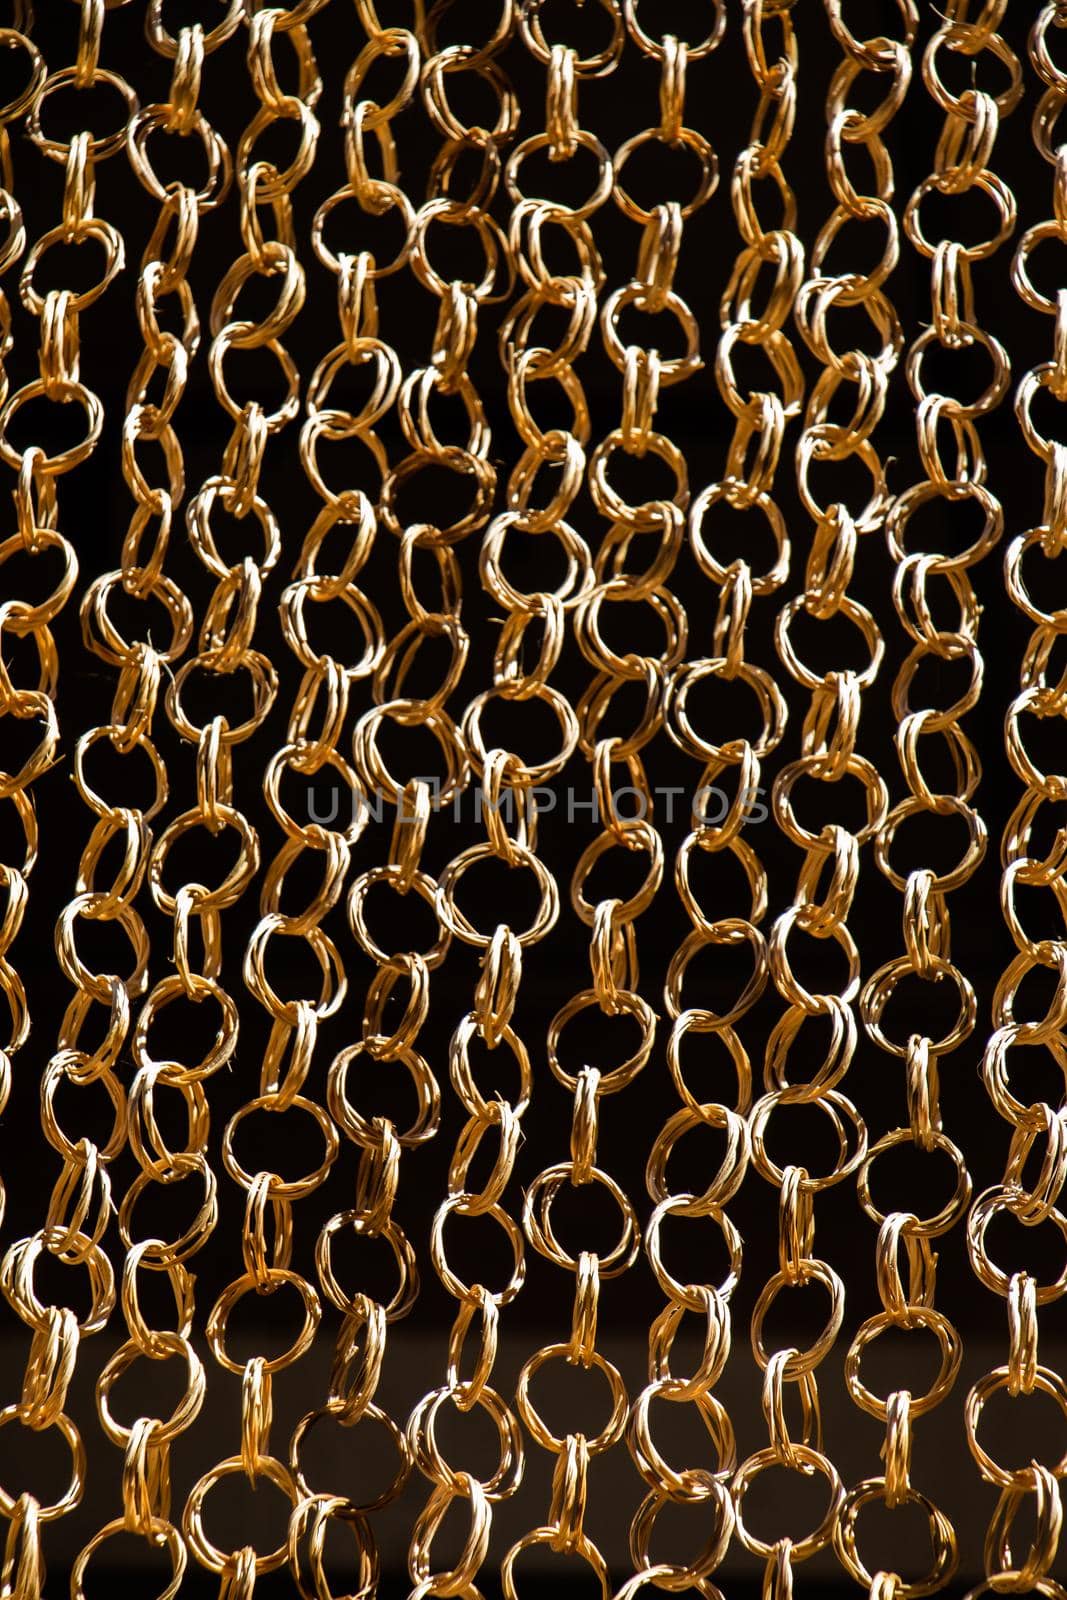 Straw chains as textured background.. texture of wooden and straw